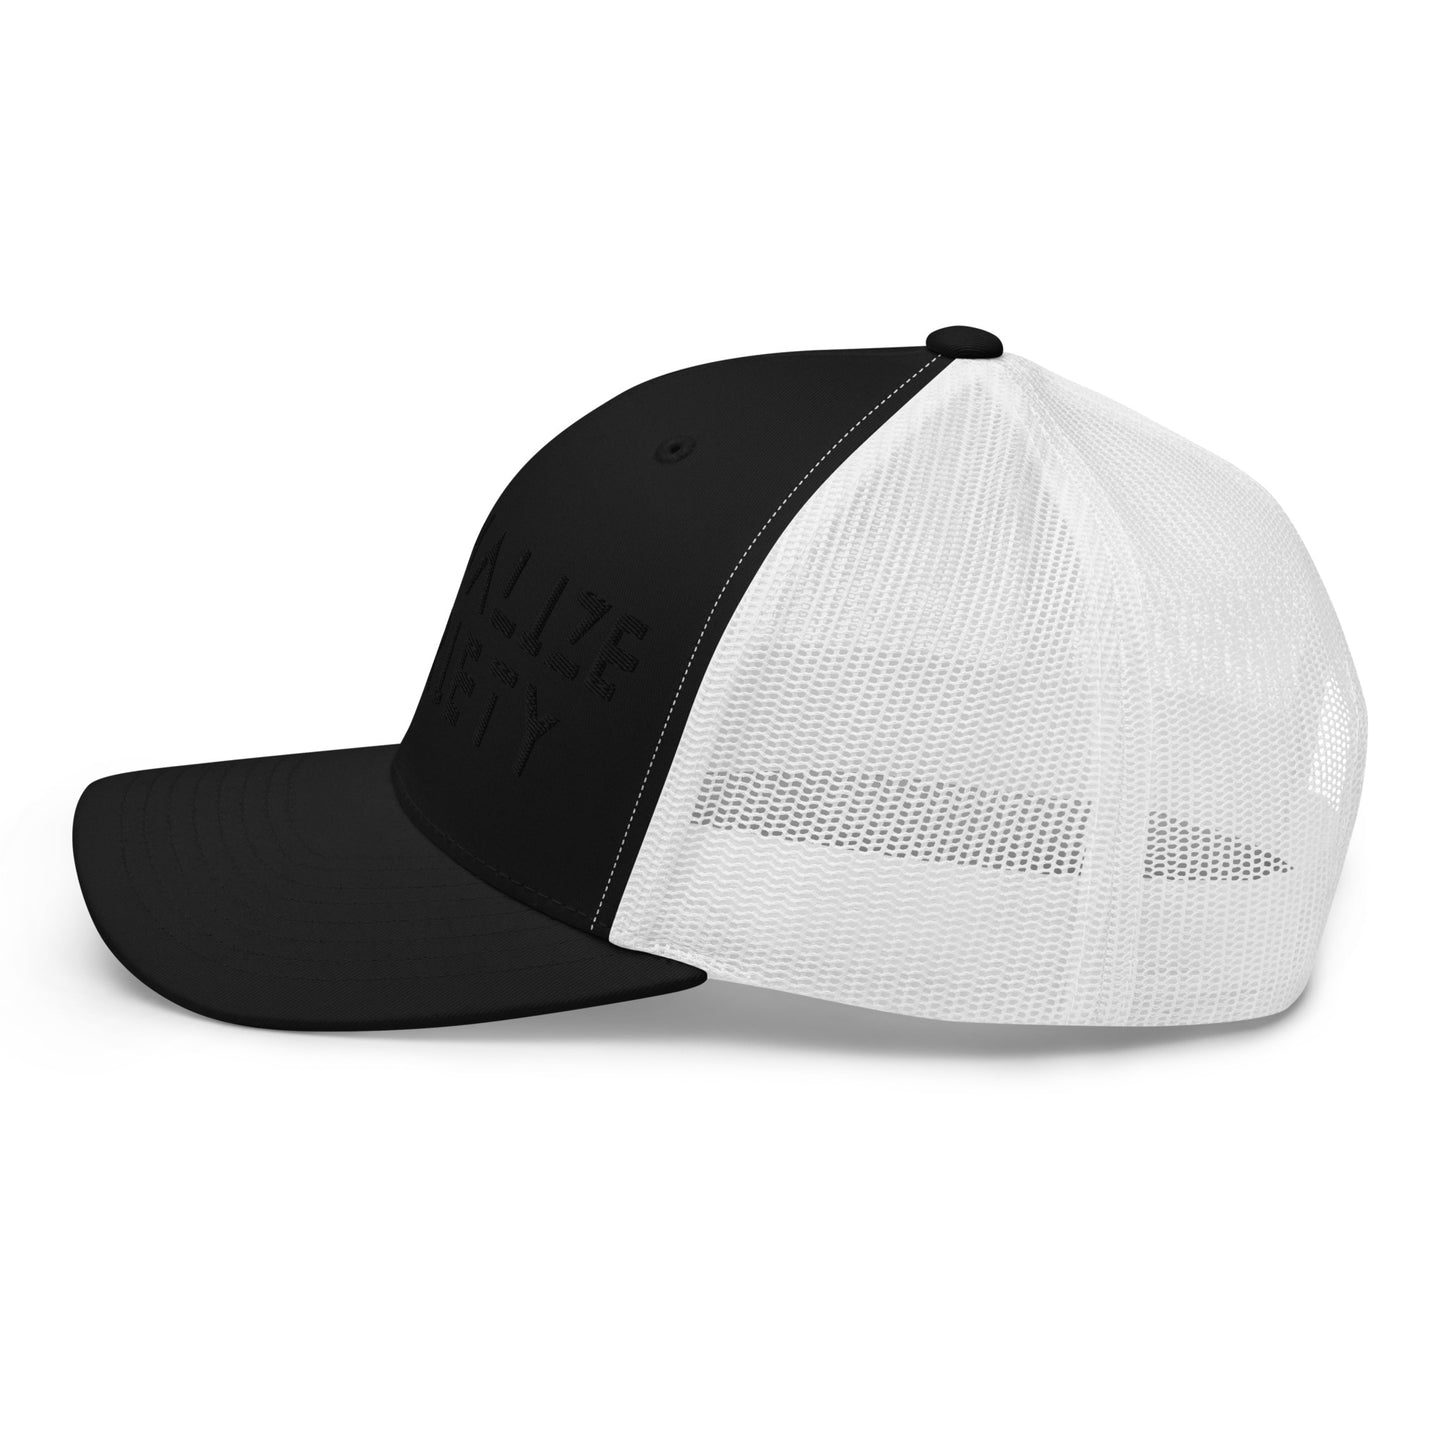 Normalize Sobriety BLCK Hat